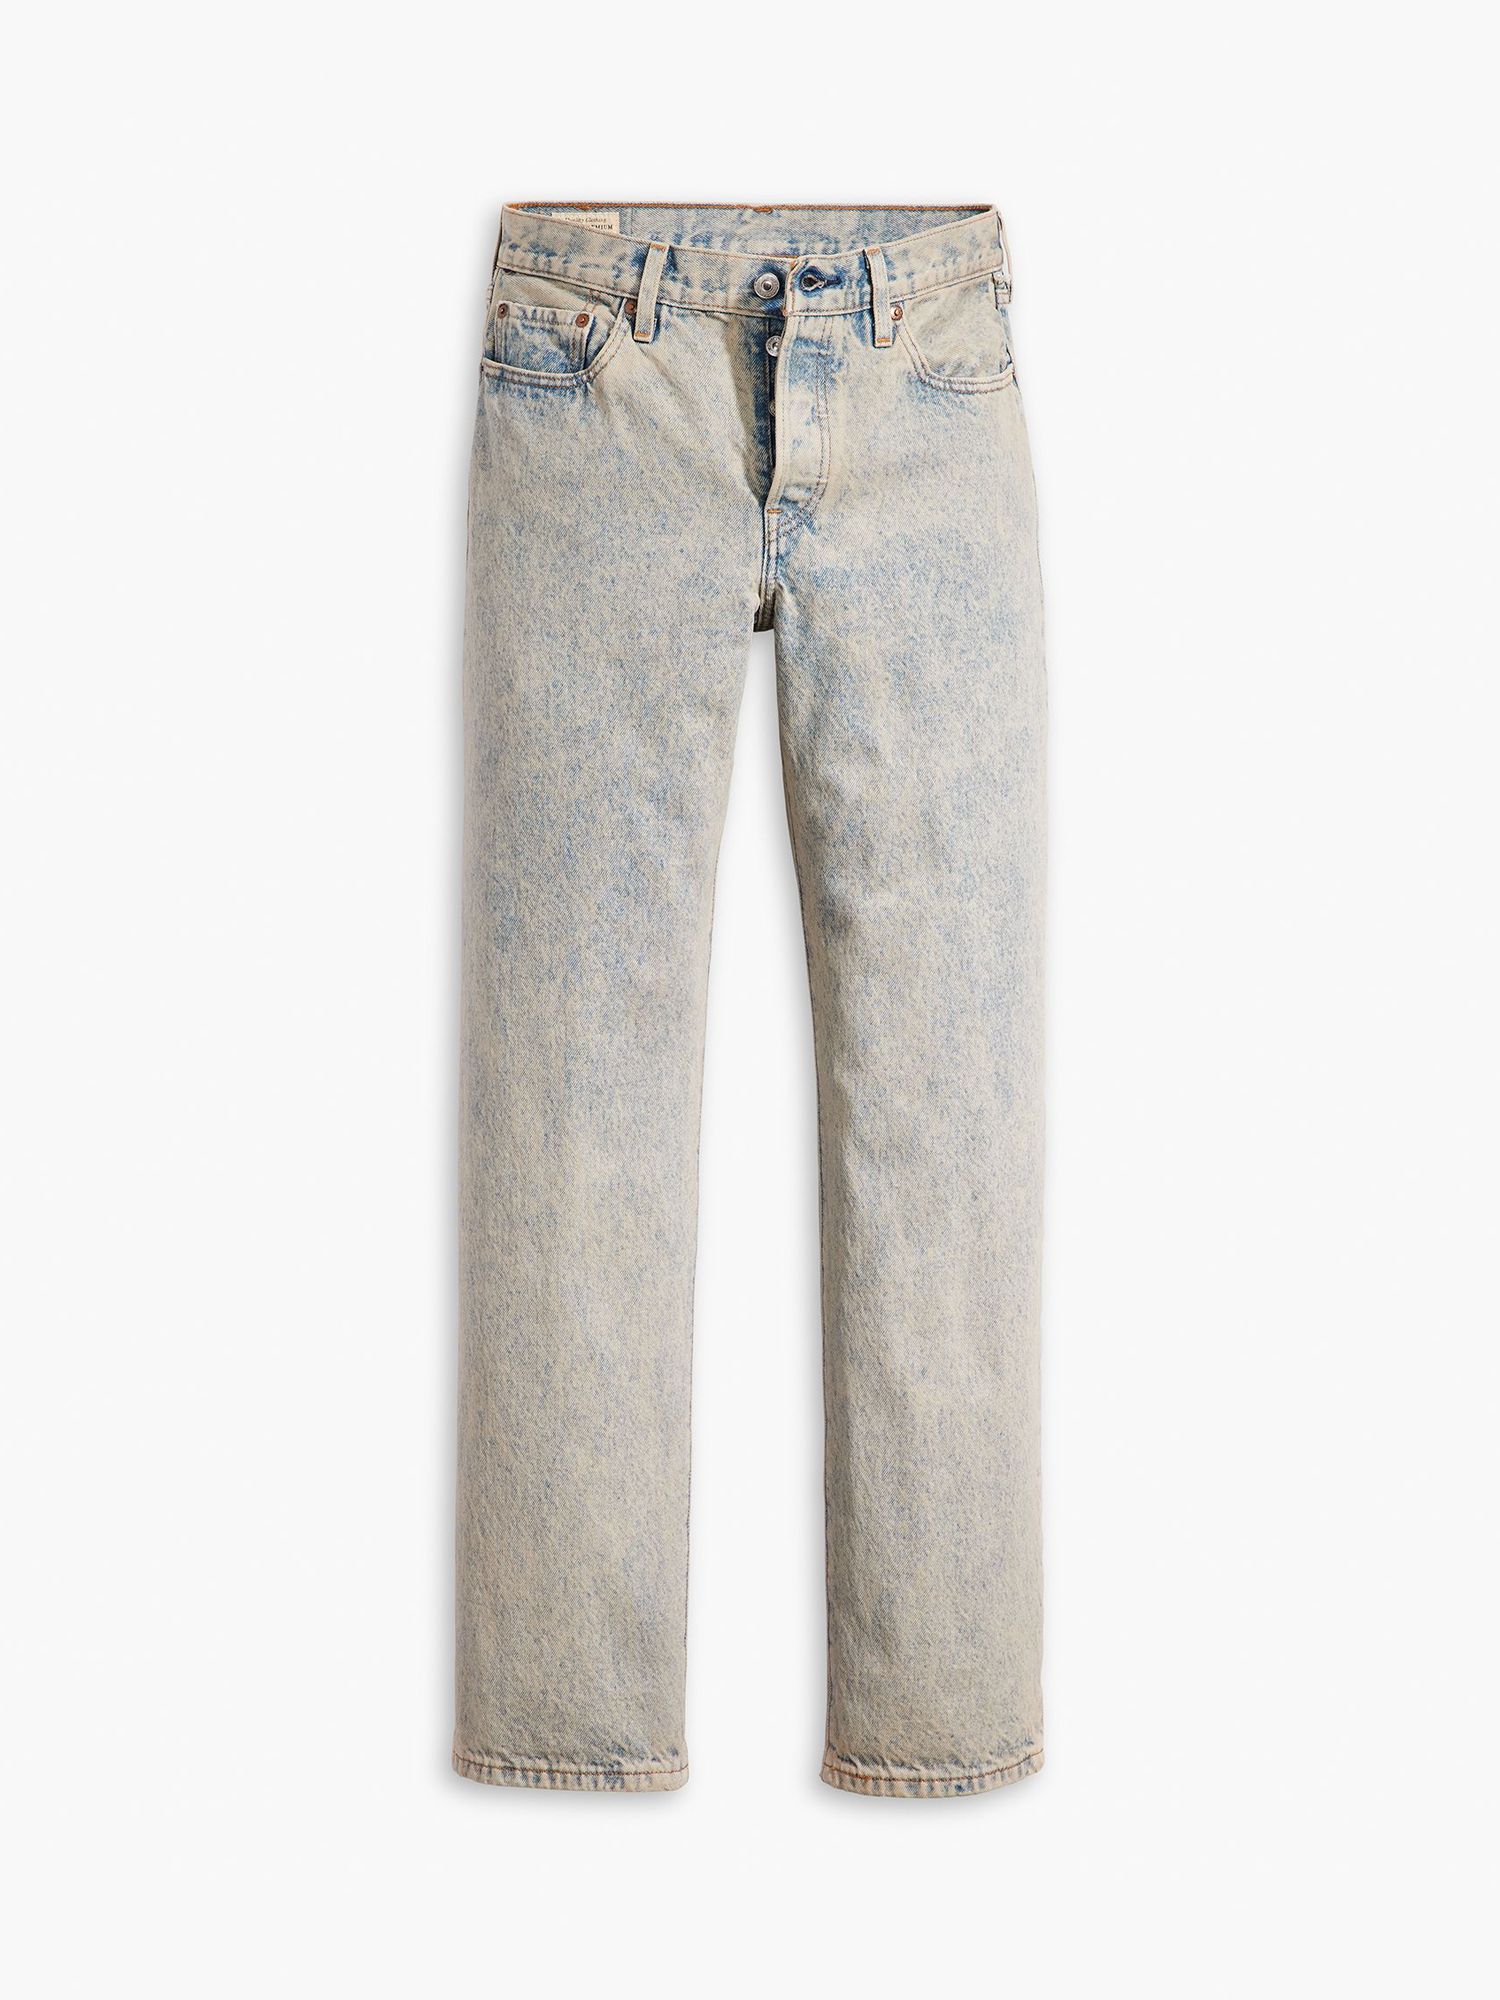 Levi's 501 90's Jeans, Where's The Tint, W24/L30